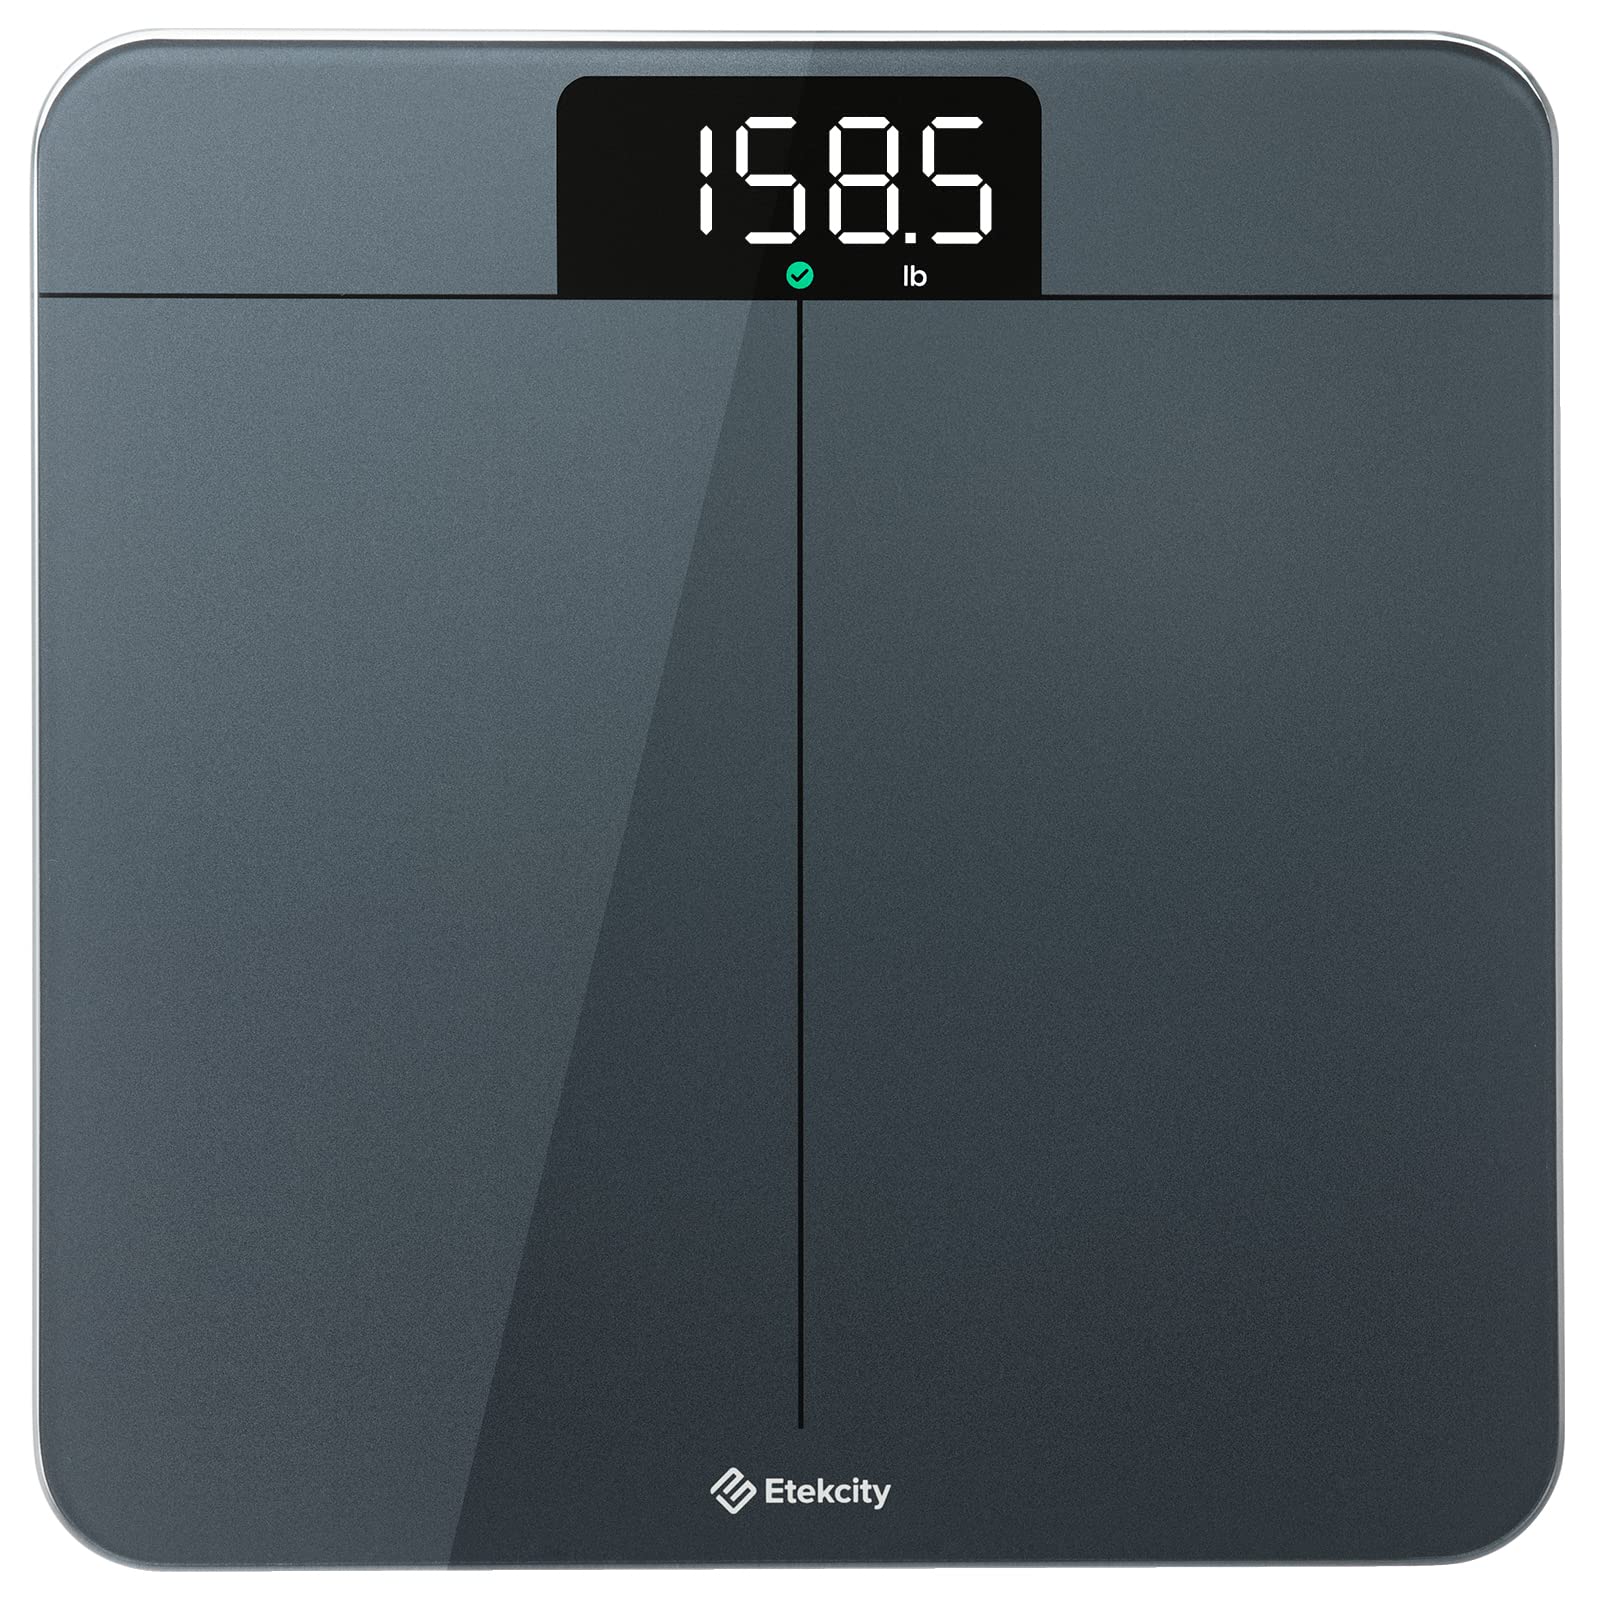 Etekcity Scale for Body Weight, Digital Bathroom Scales for People, Most Accurate to 0 05lb, Bright LED Display Large Clear Numbers, Upgraded Quality for the Elderly Safe Home Use, 400 lbs>